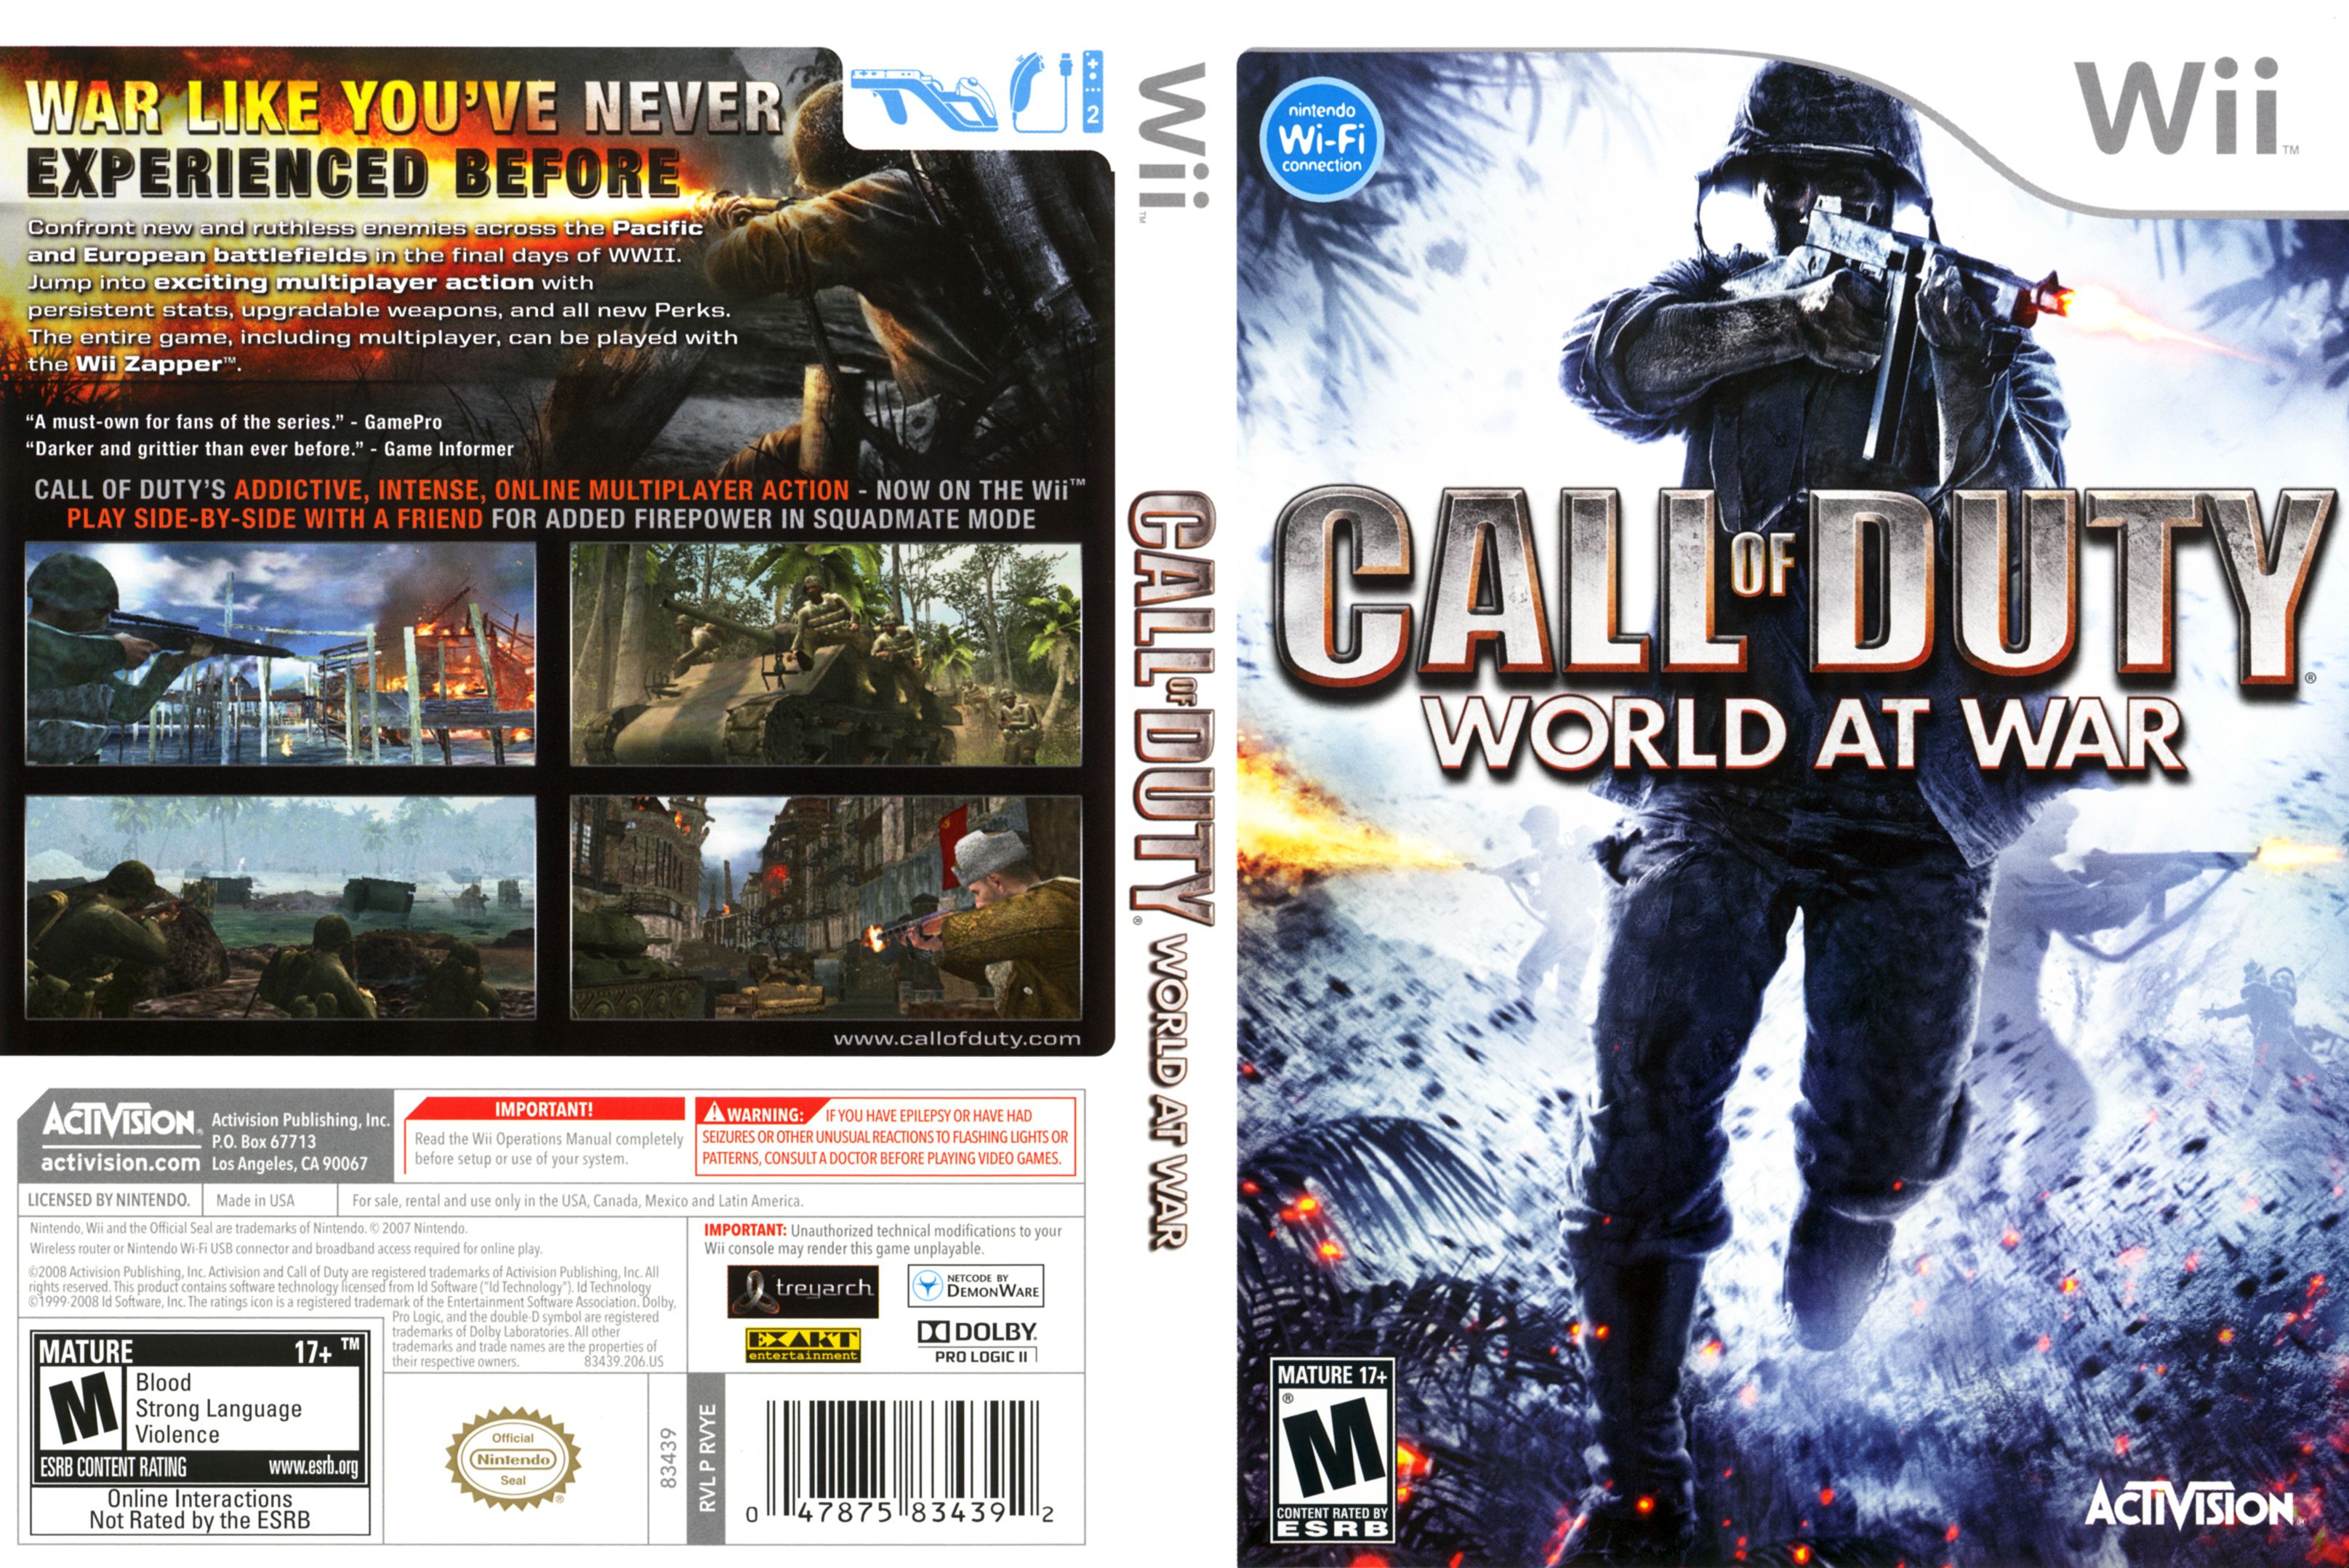 Call Of Duty World At War Ntsc Wii Full Wii Covers Cover Century Over 500 000 Album Art Covers For Free